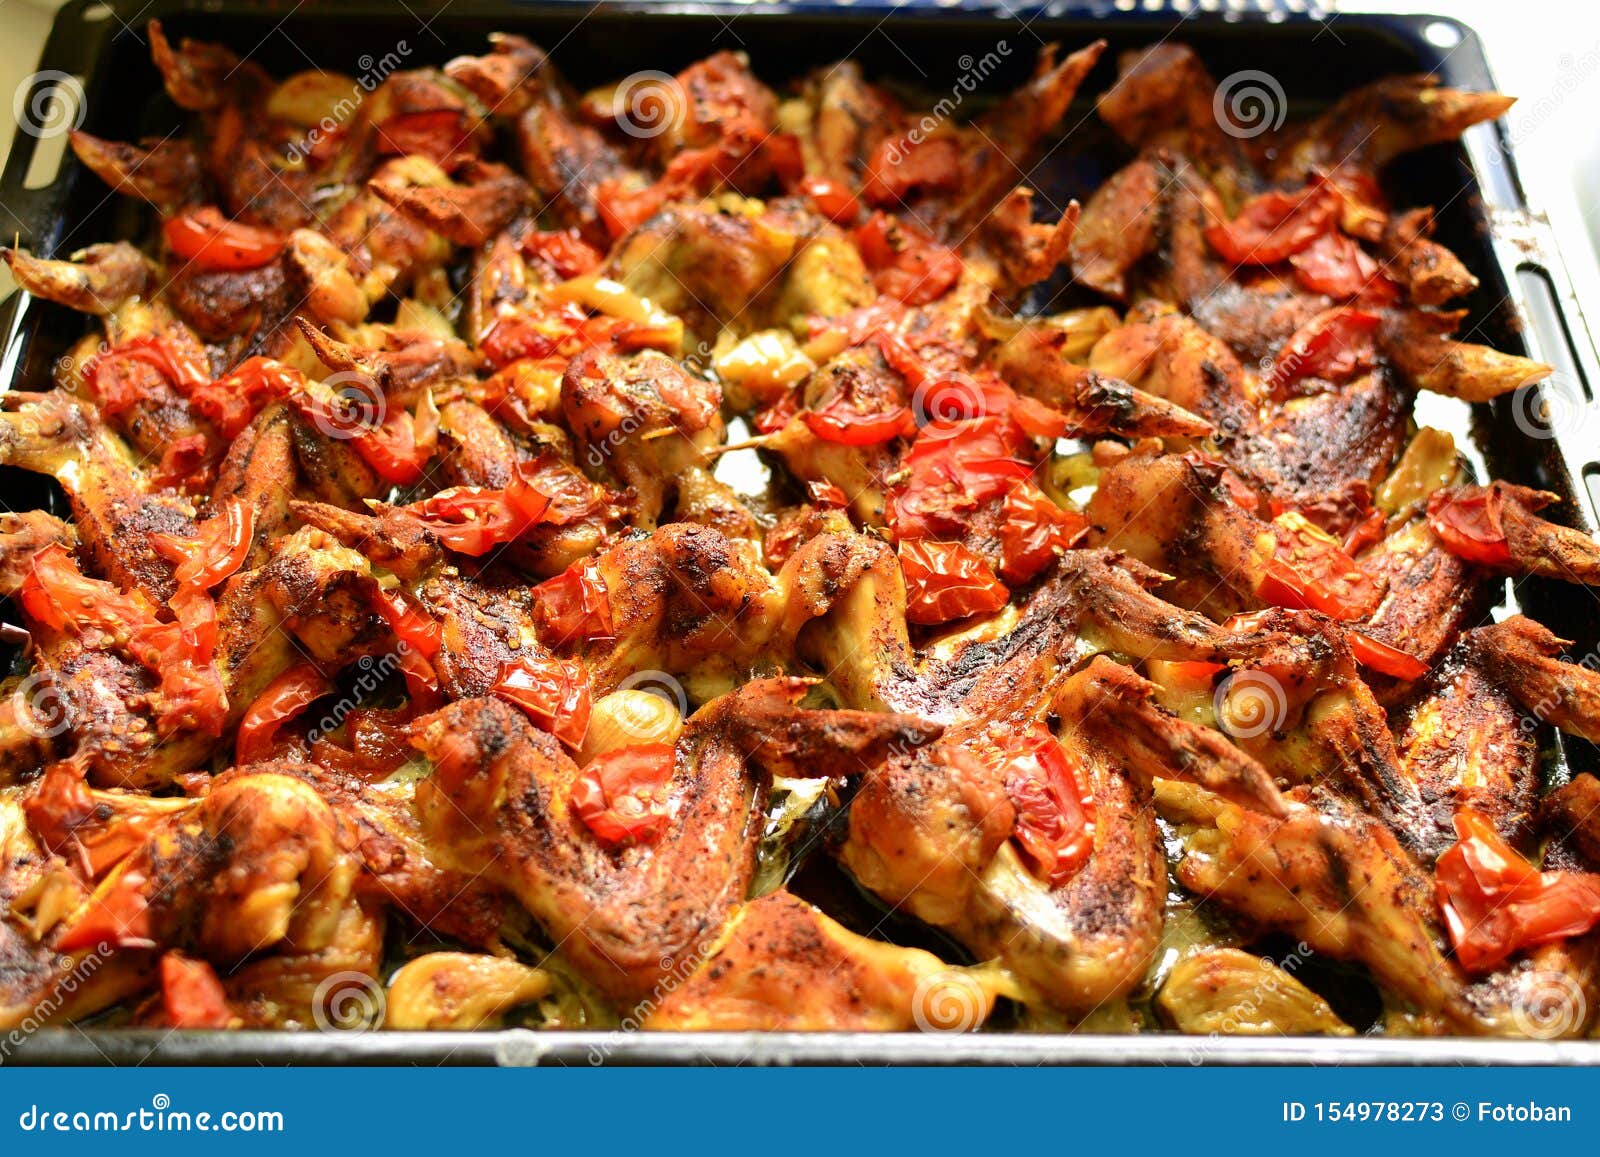 baked chicken wings on pepper a with garlic and tomate